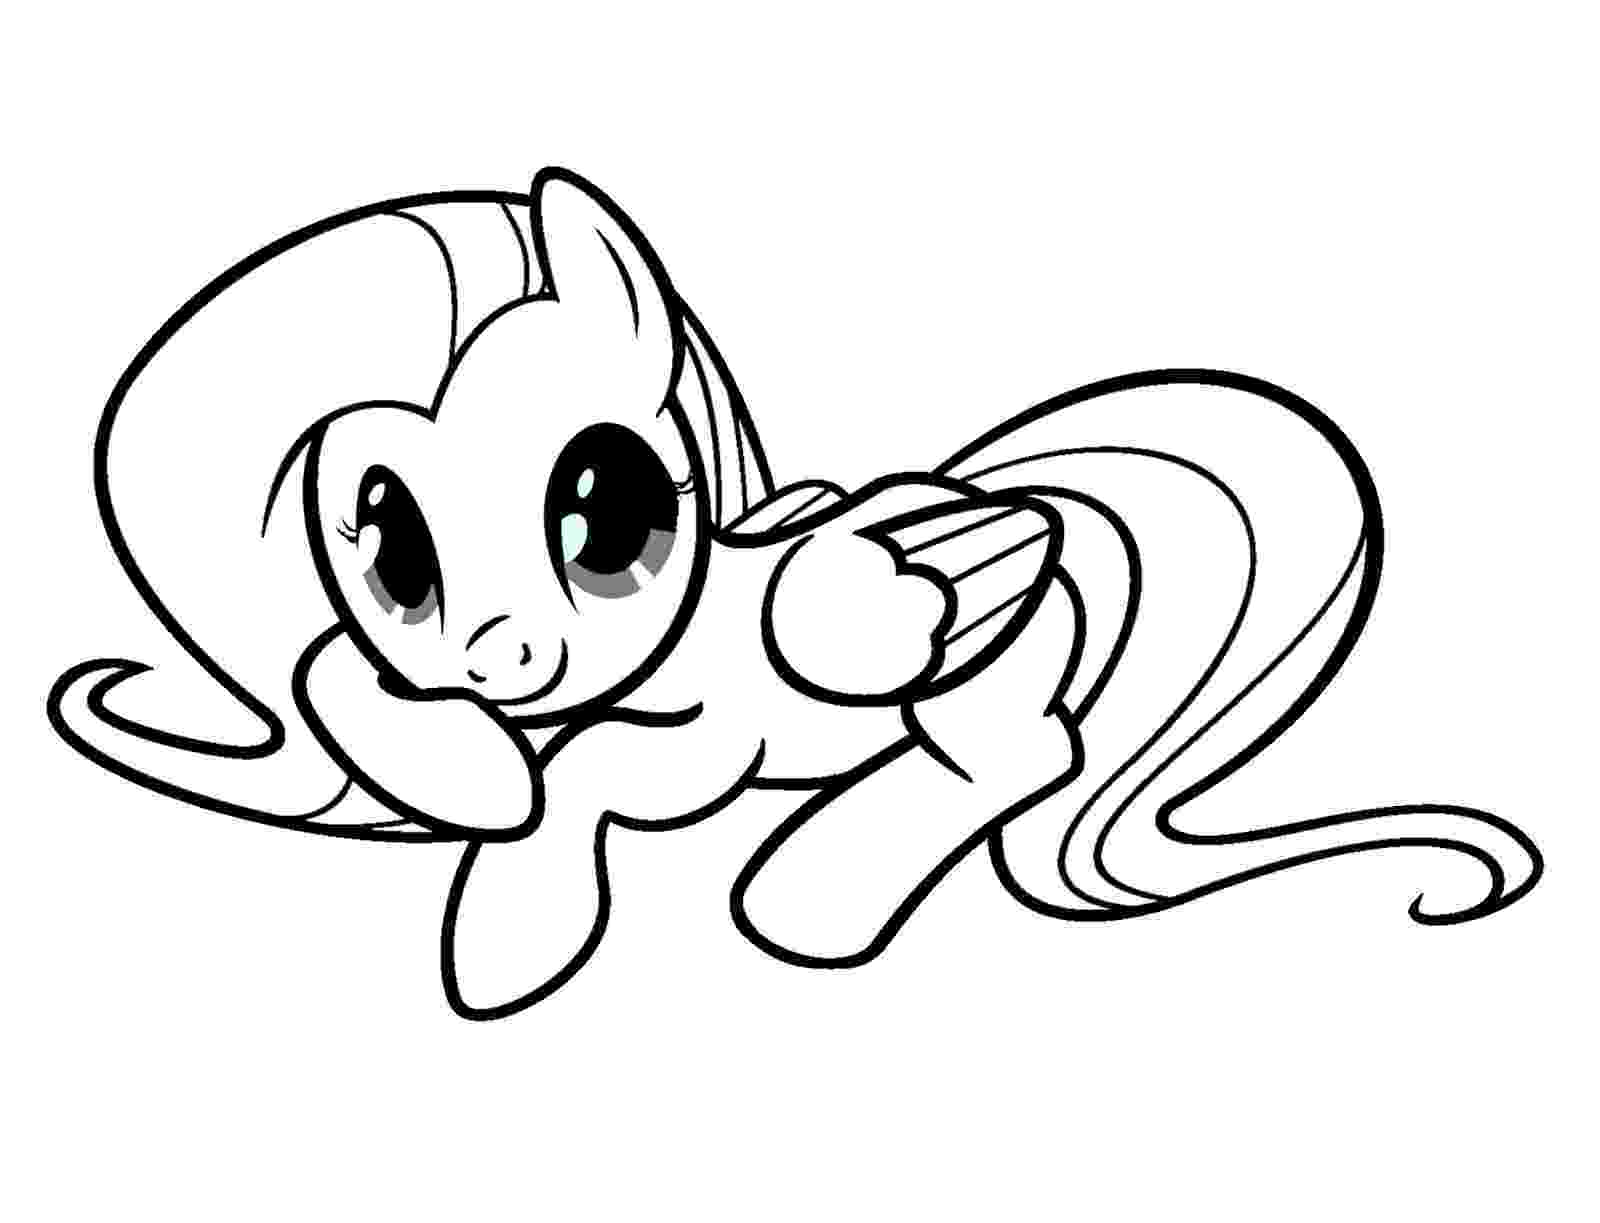 coloring pages of fluttershy fluttershy coloring pages best coloring pages for kids of pages fluttershy coloring 